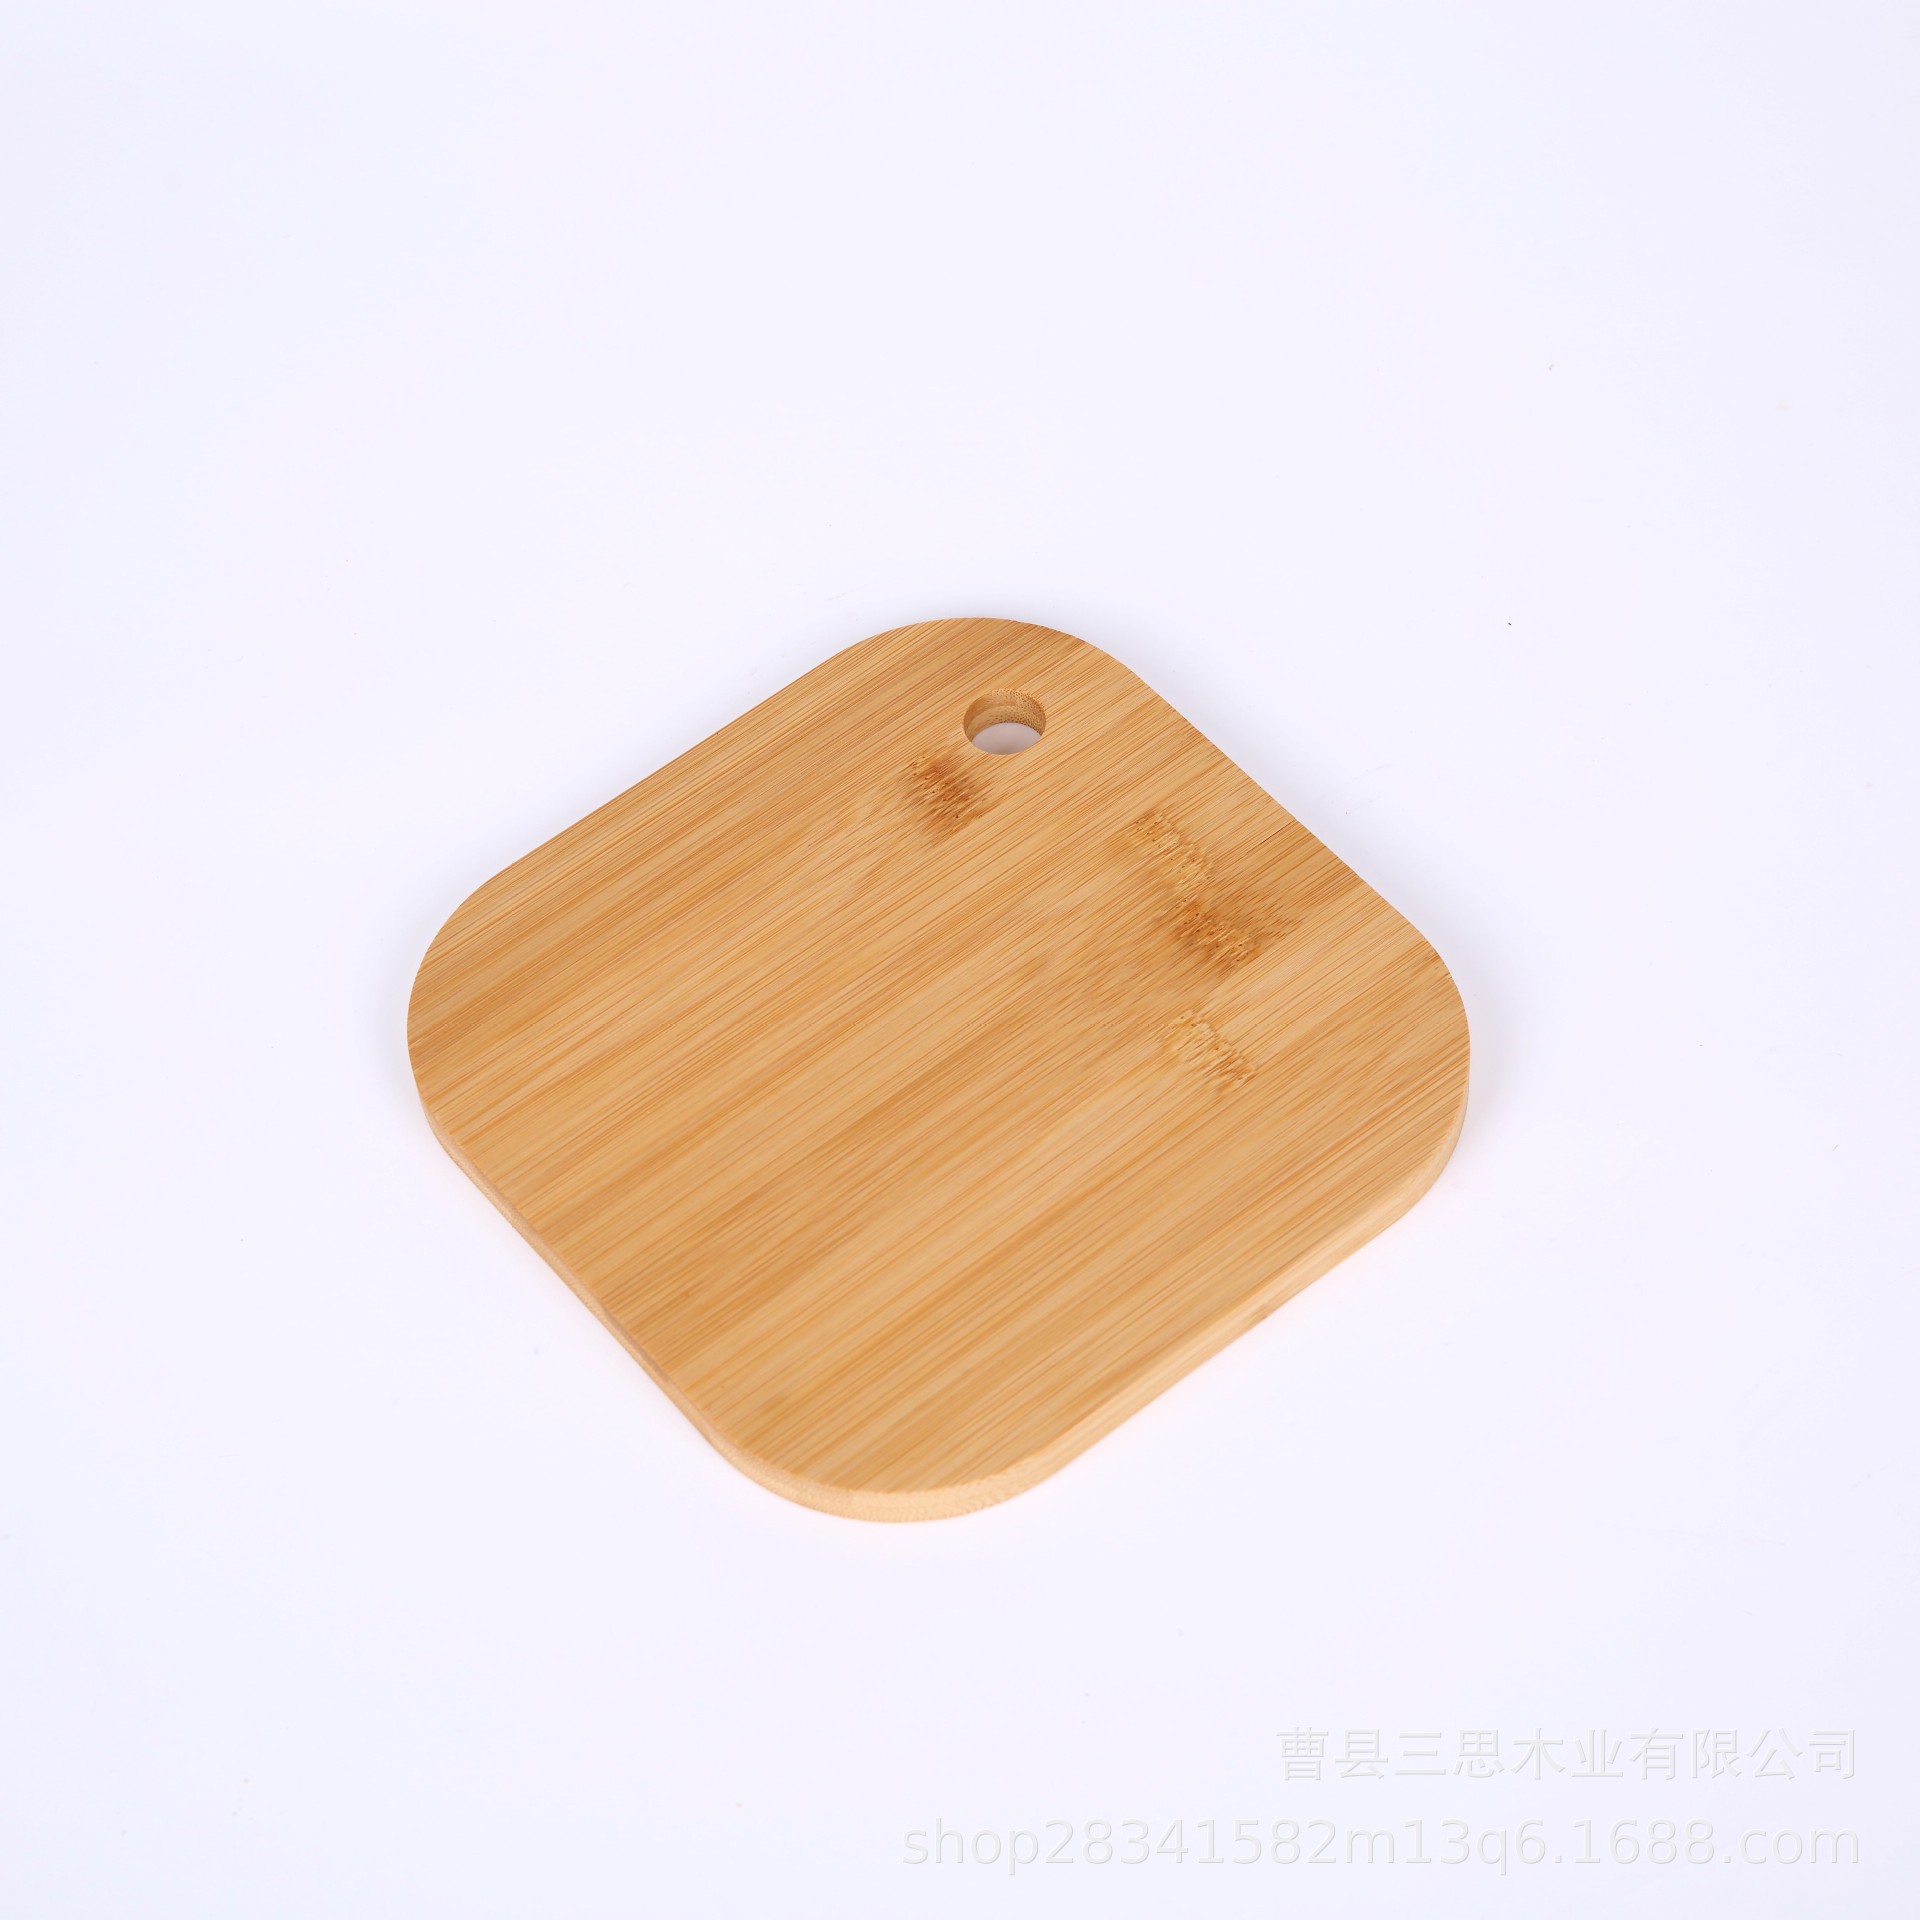 Bamboo Chopping Board Solid Wood Fruit Tray Kitchen Chopping Board Cut Beef Pizza Plate in Stock Bamboo Chopping Board